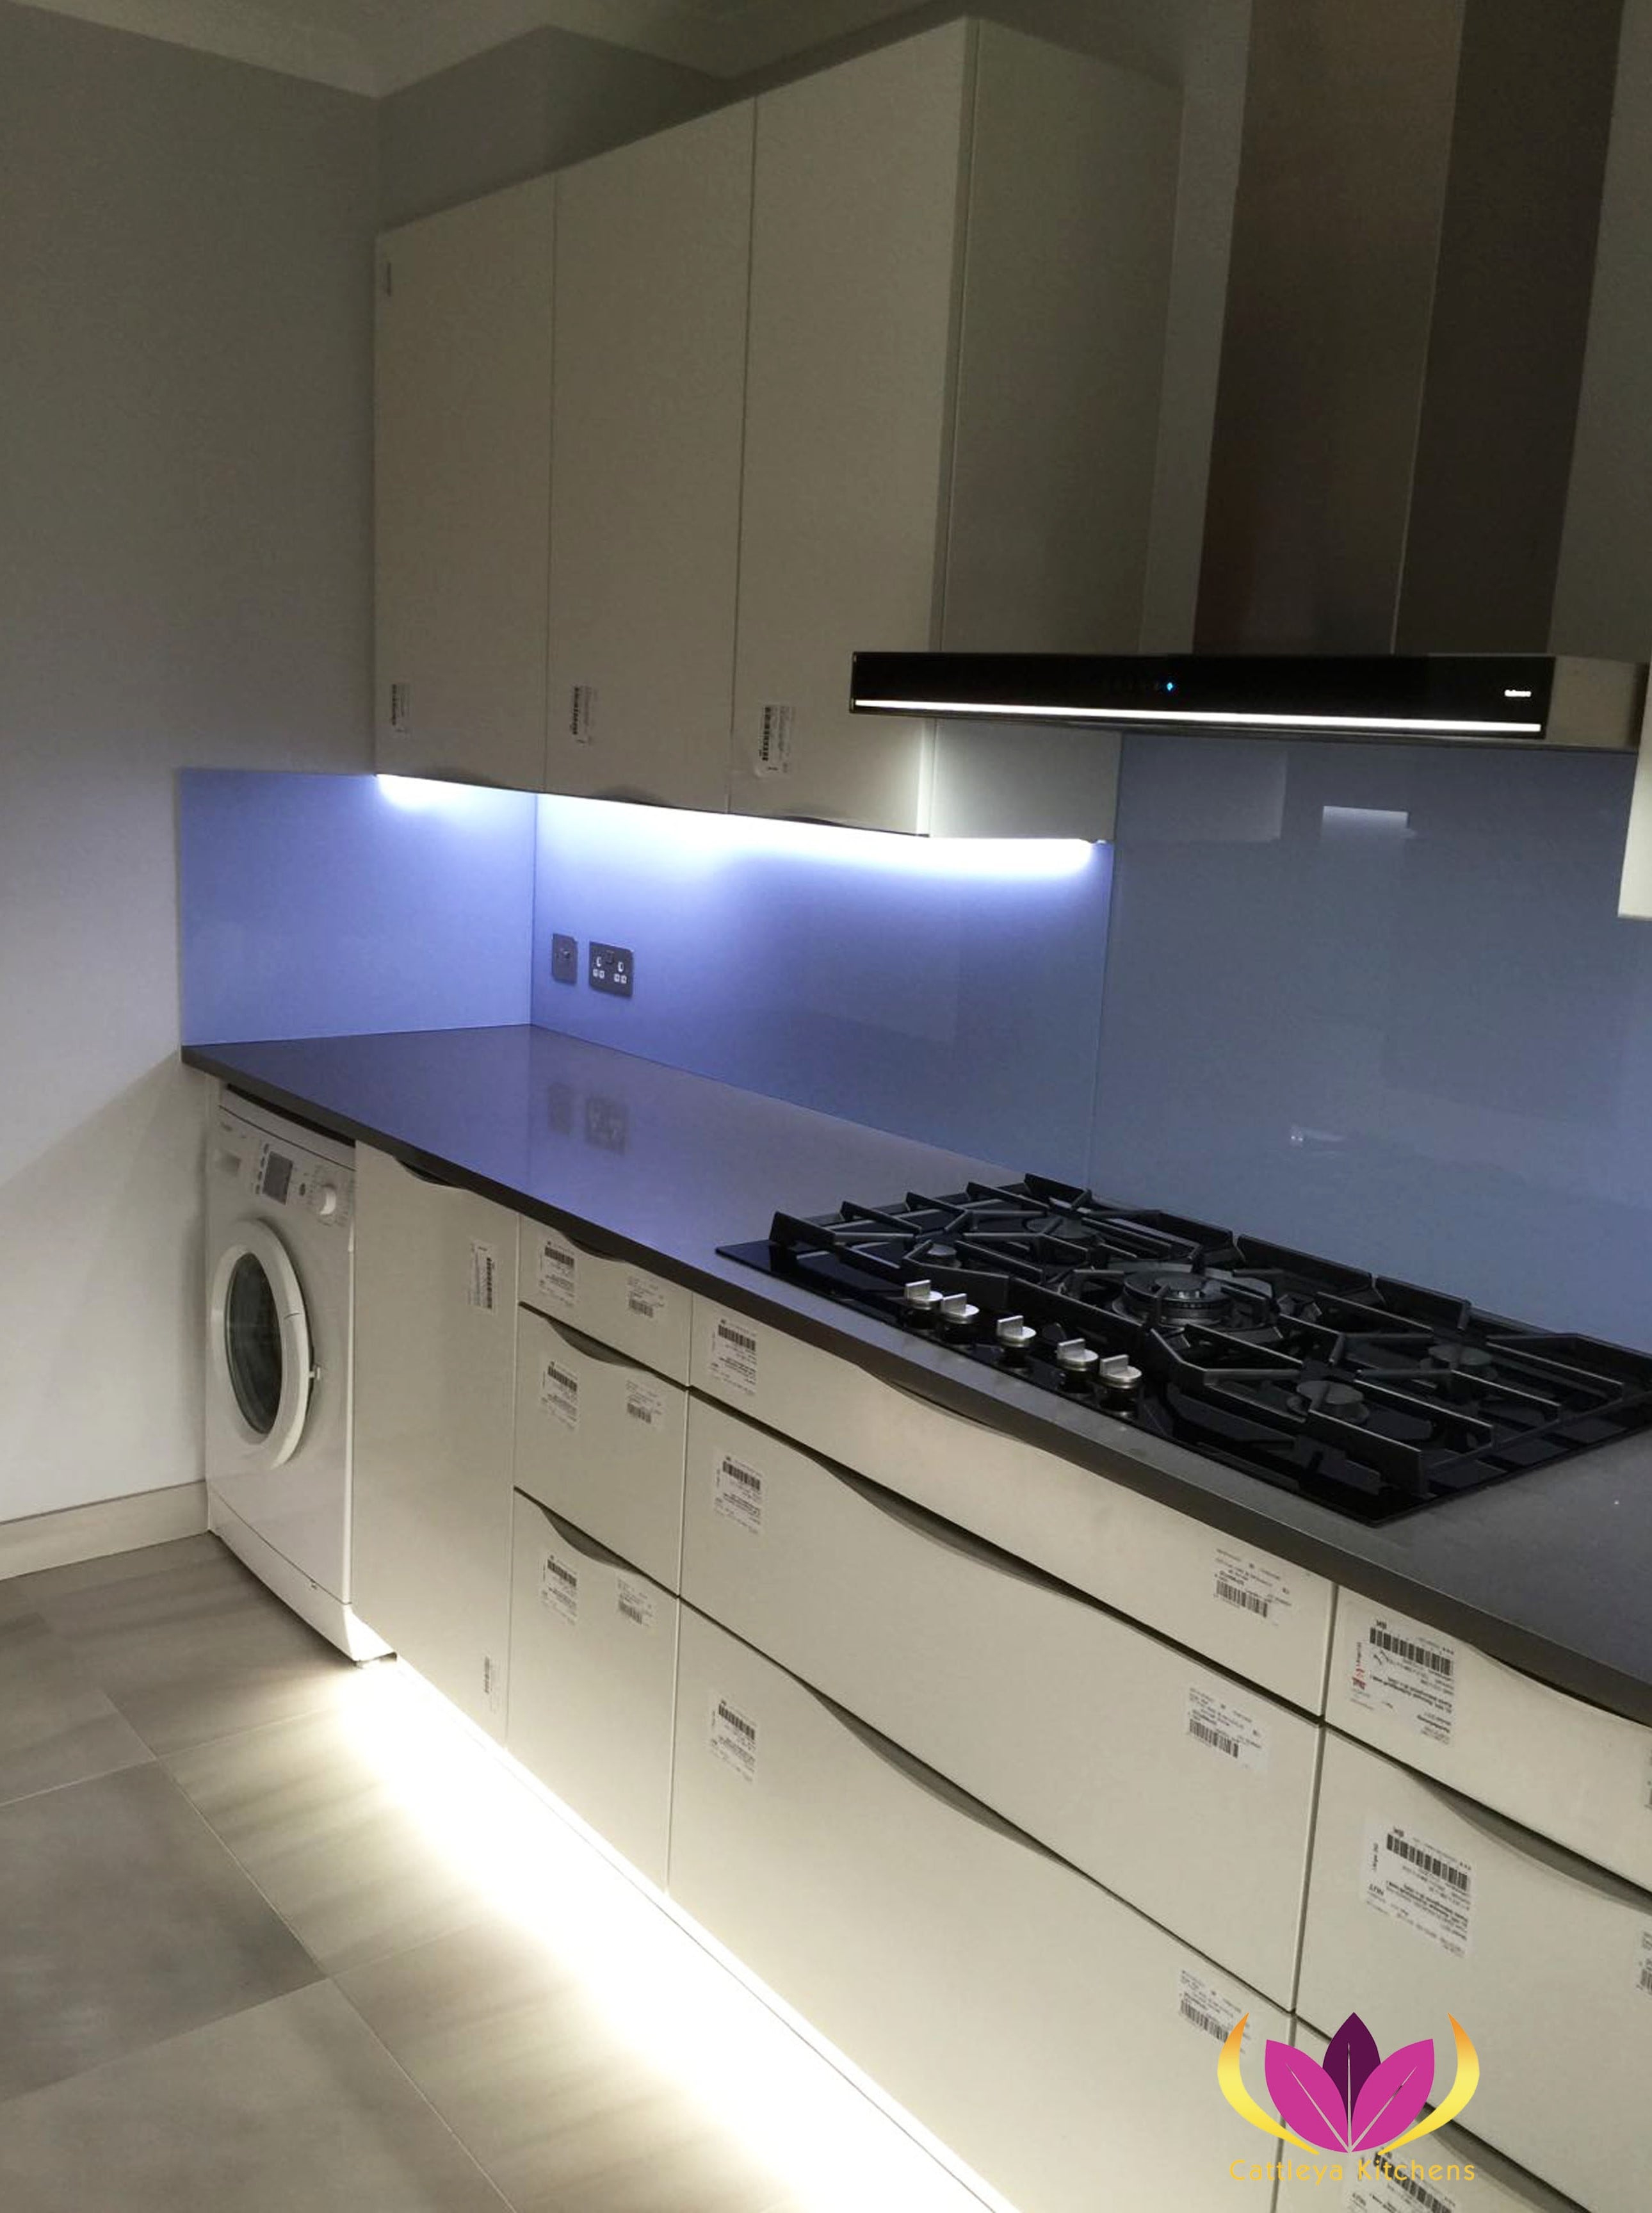 Kitchen & Laundry in one in Ealing Finished Kitchen Project